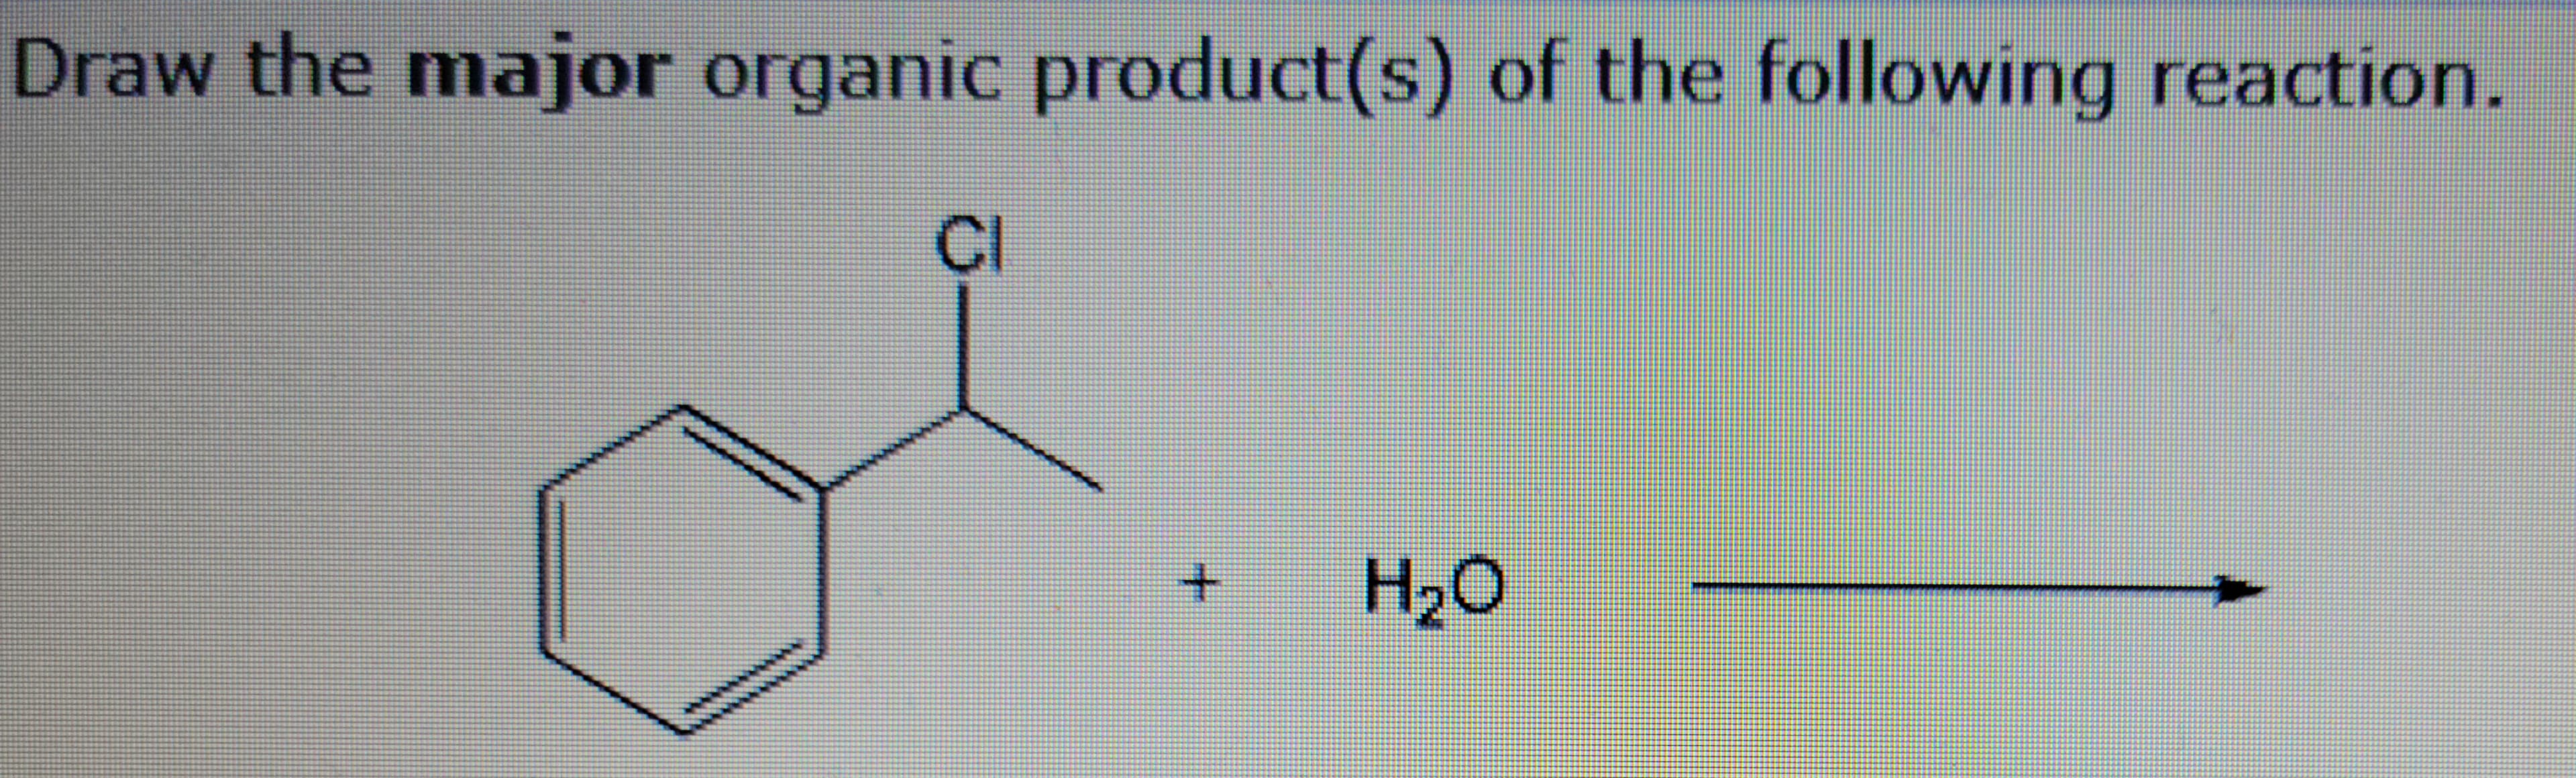 Draw the major organic product(s) of the following reaction.
2
s
2
Cl
+ H₂O